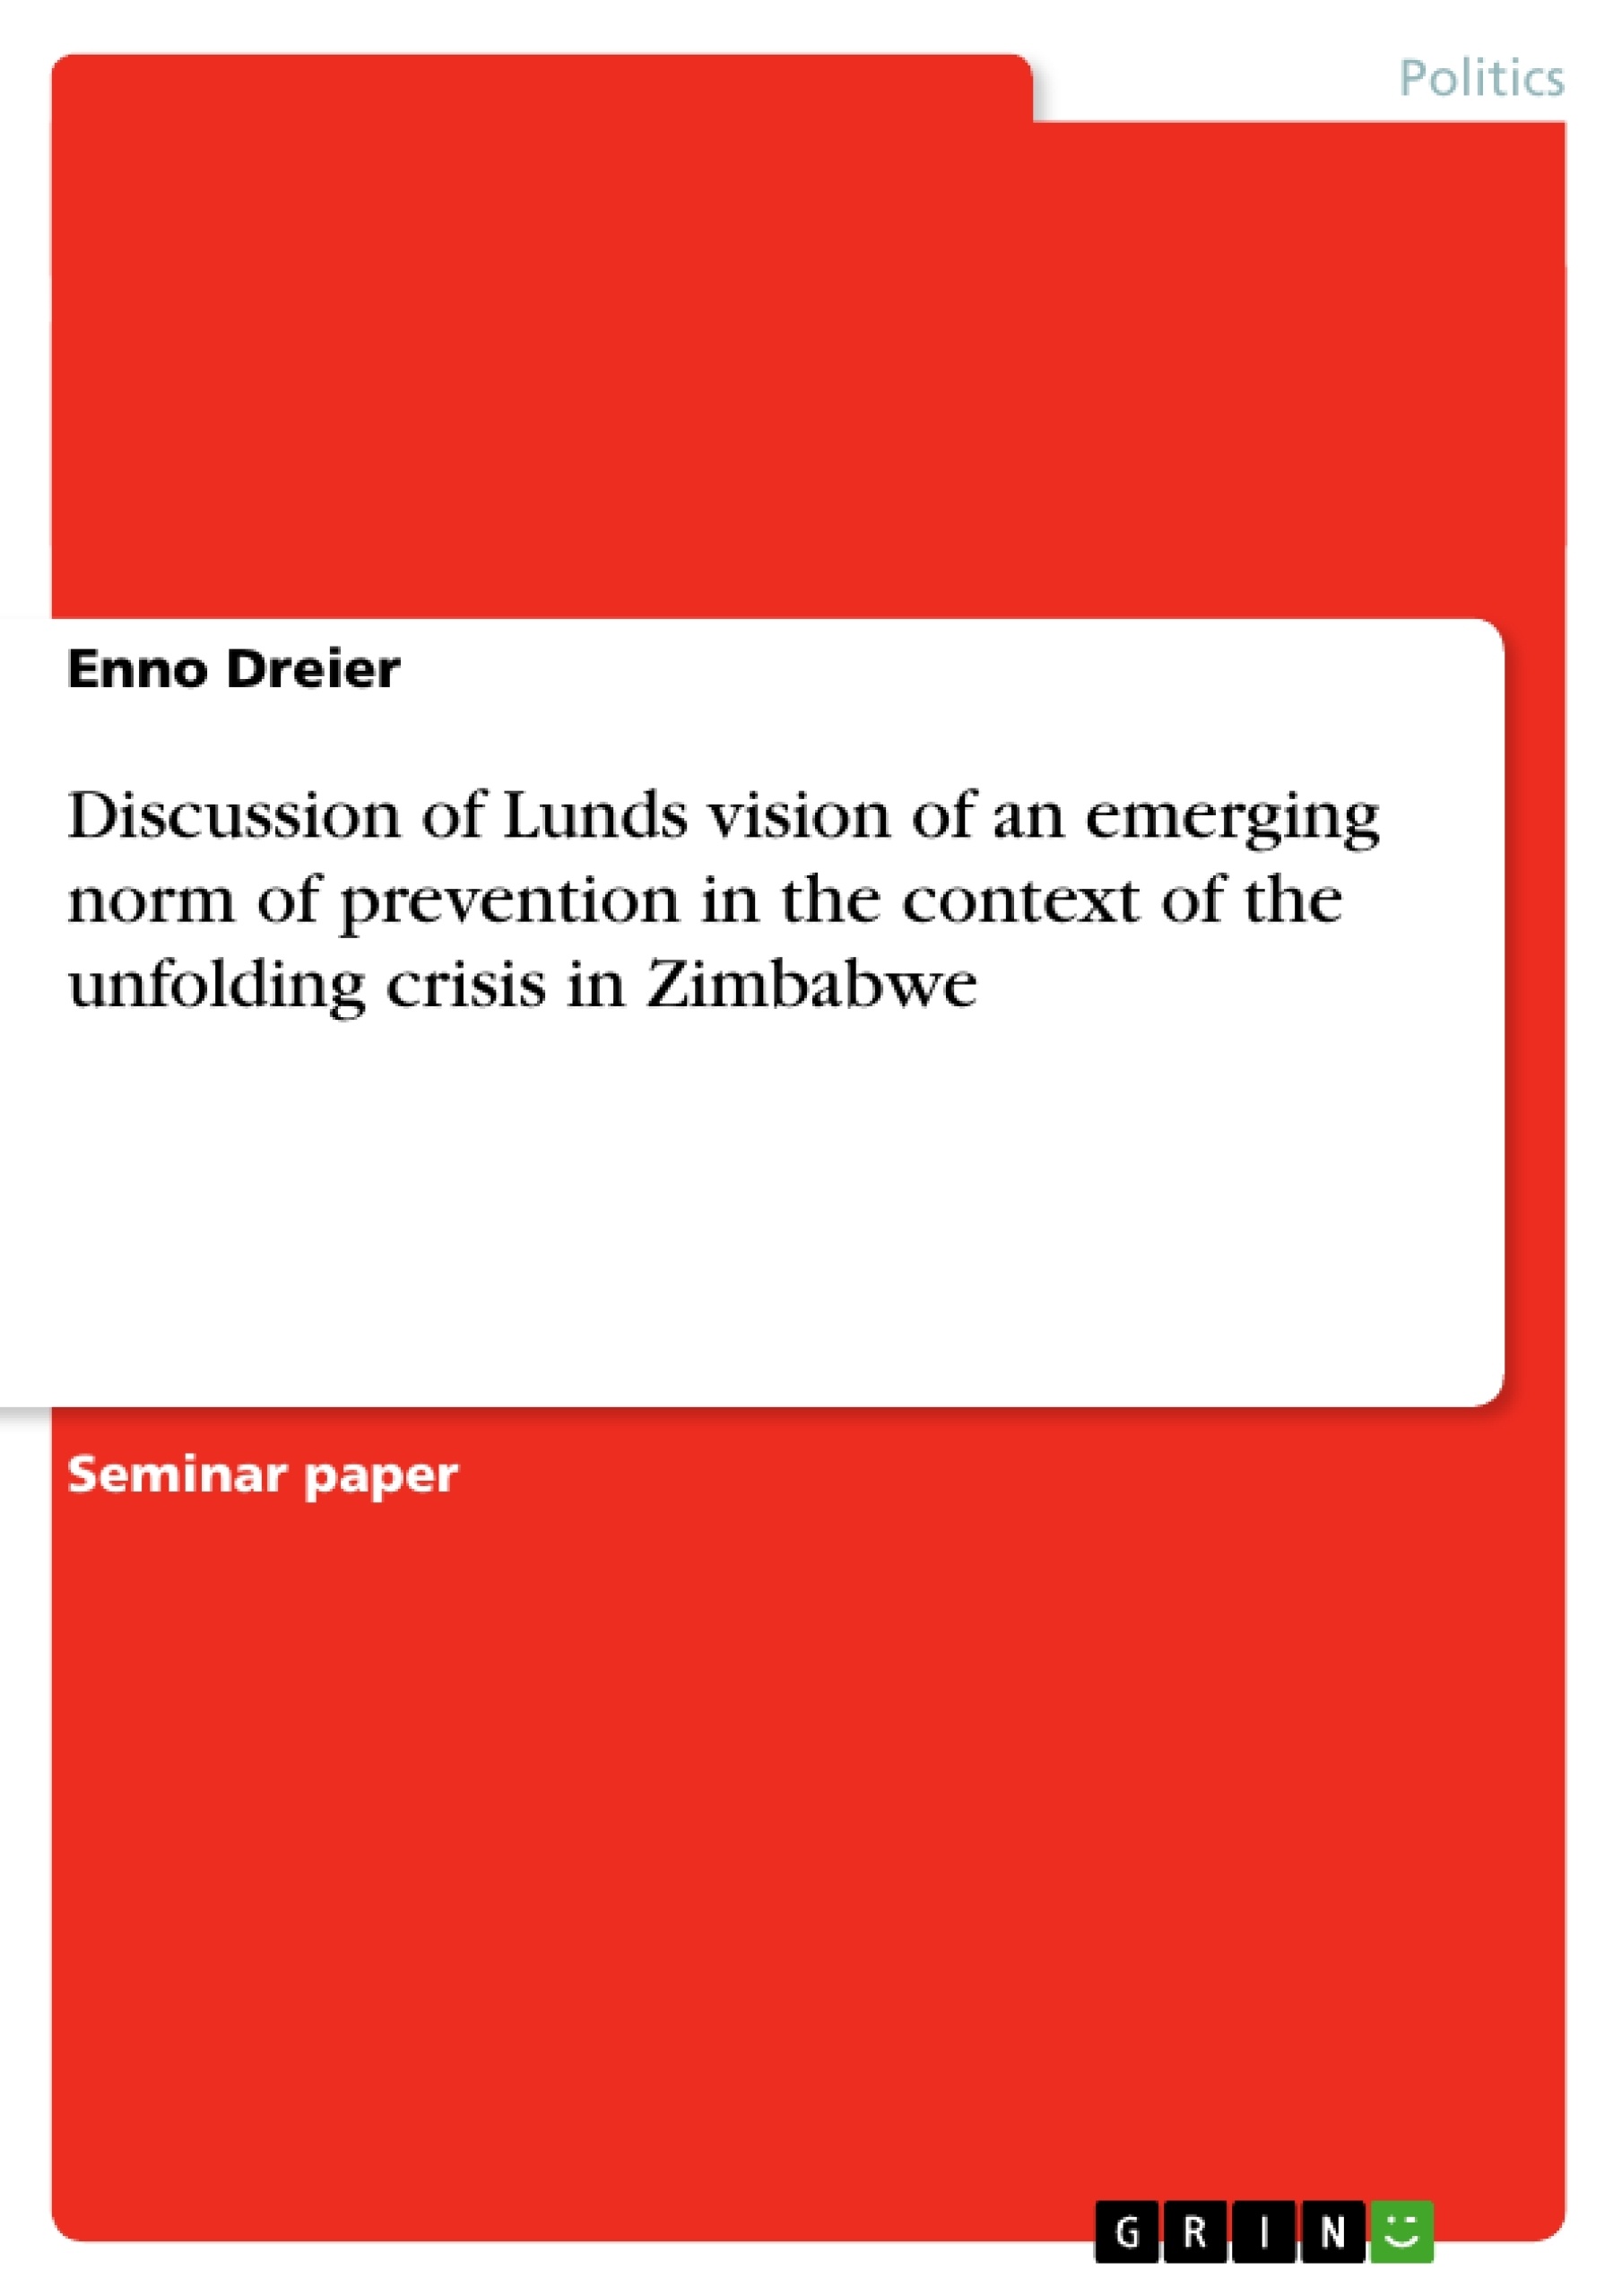 Title: Discussion of Lunds vision of an emerging norm of prevention in the context of the unfolding crisis in Zimbabwe